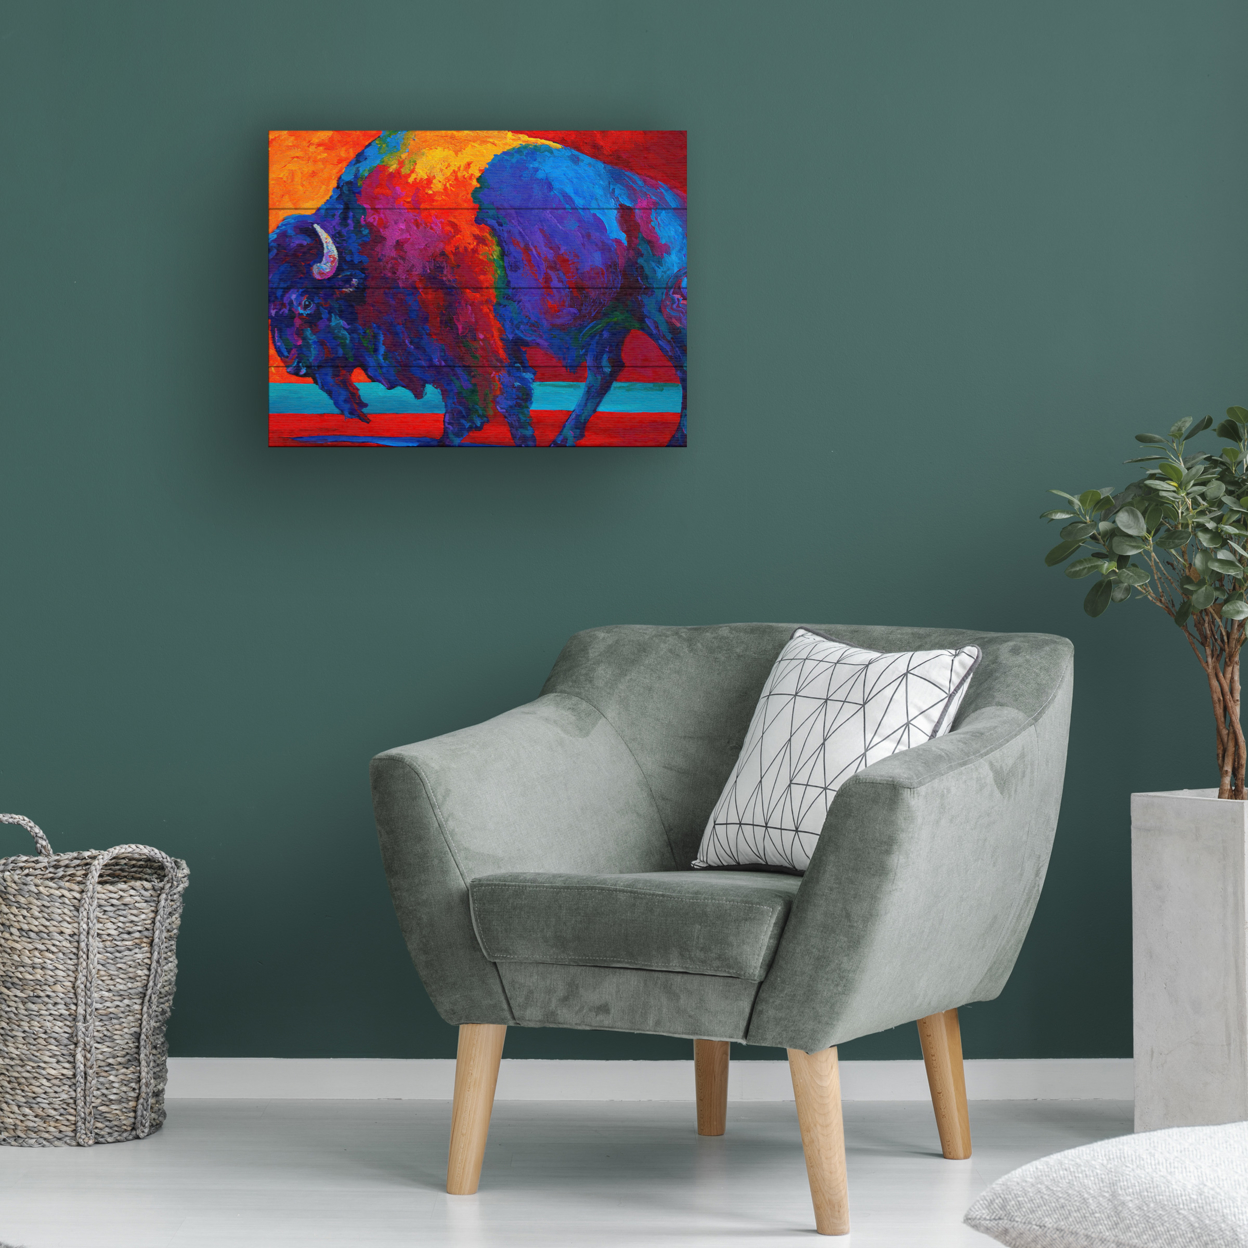 Wall Art 12 X 16 Inches Titled Abstract Bison Ready To Hang Printed On Wooden Planks